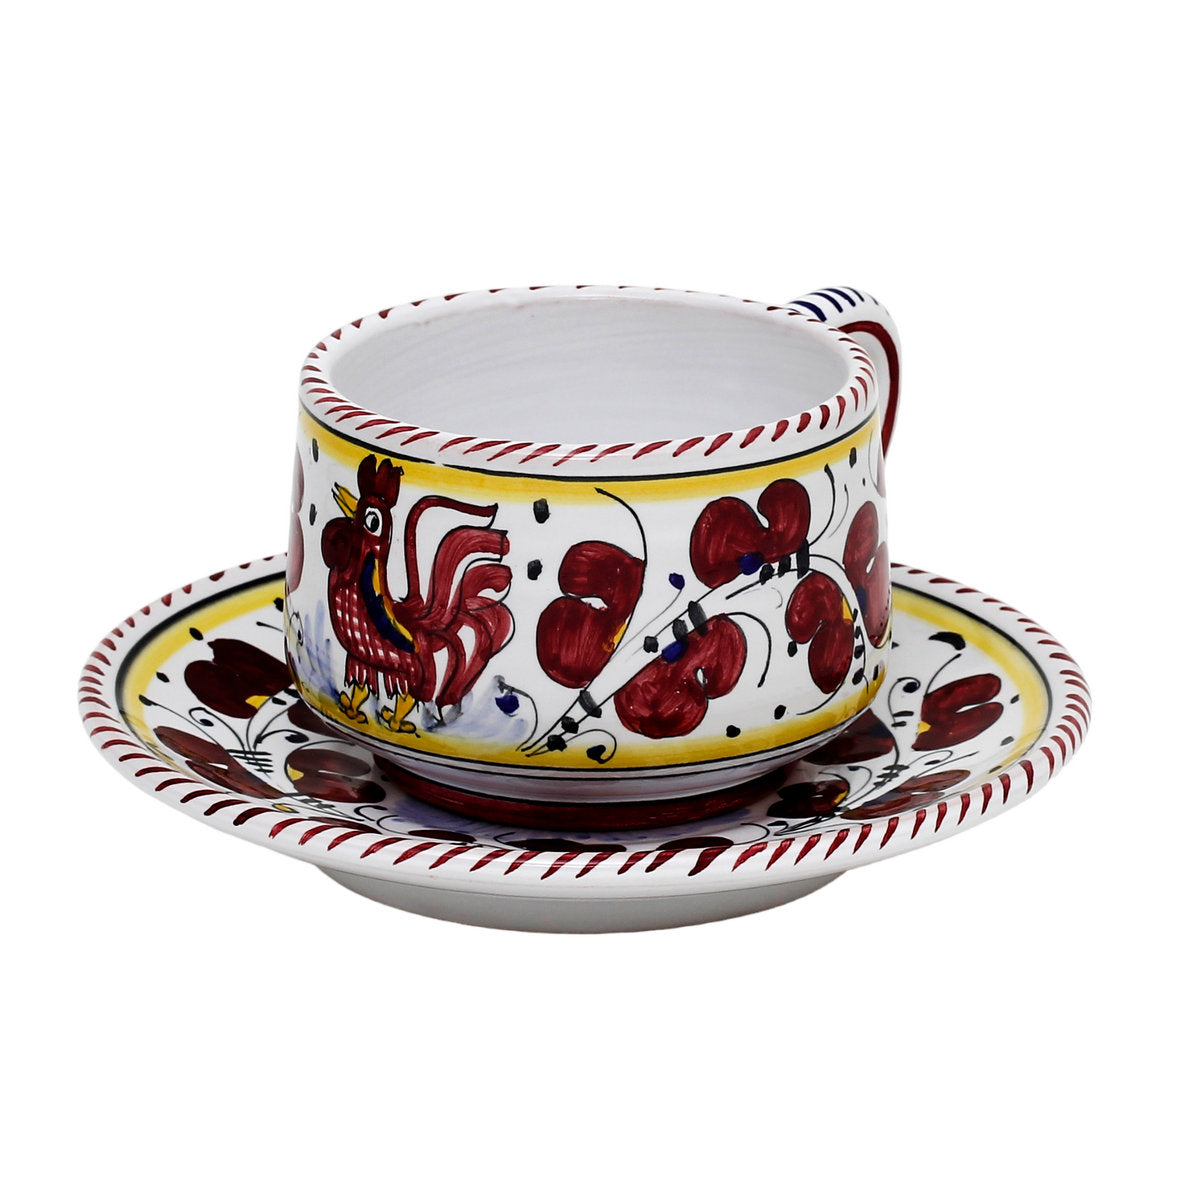 ORVIETO RED ROOSTER: Cup and Saucer [STRIPED RIM] - Artistica.com